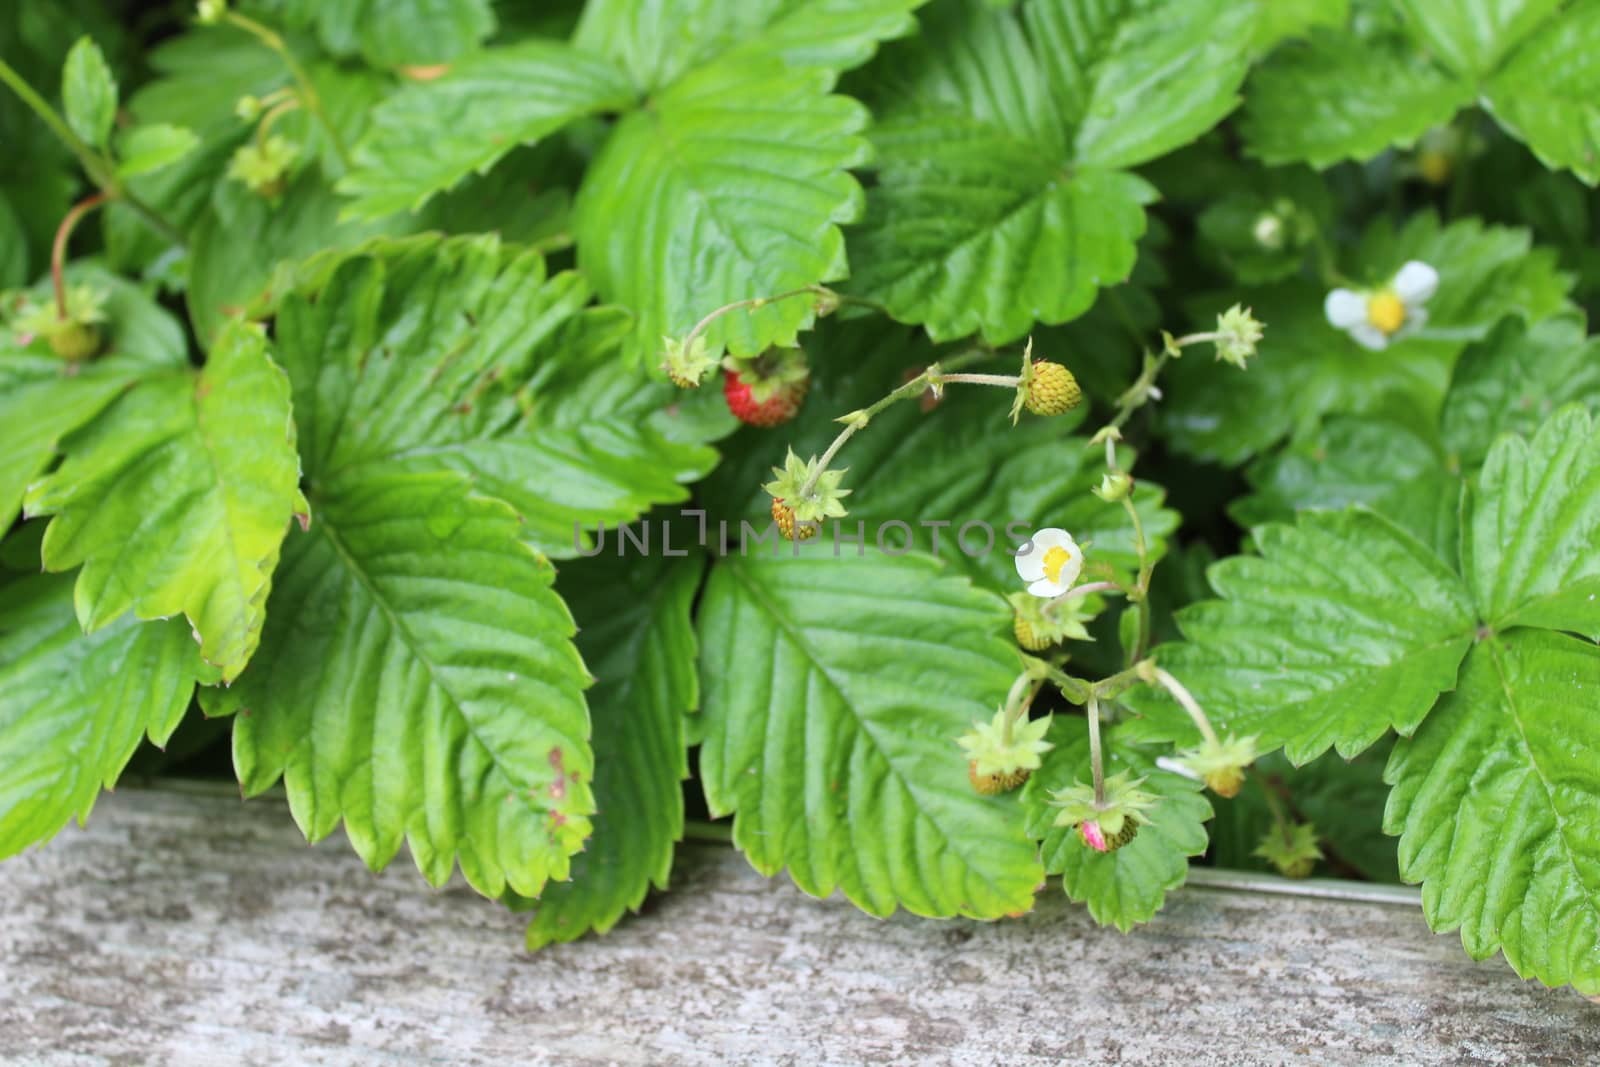 The picture shows wild strawberries in the garden